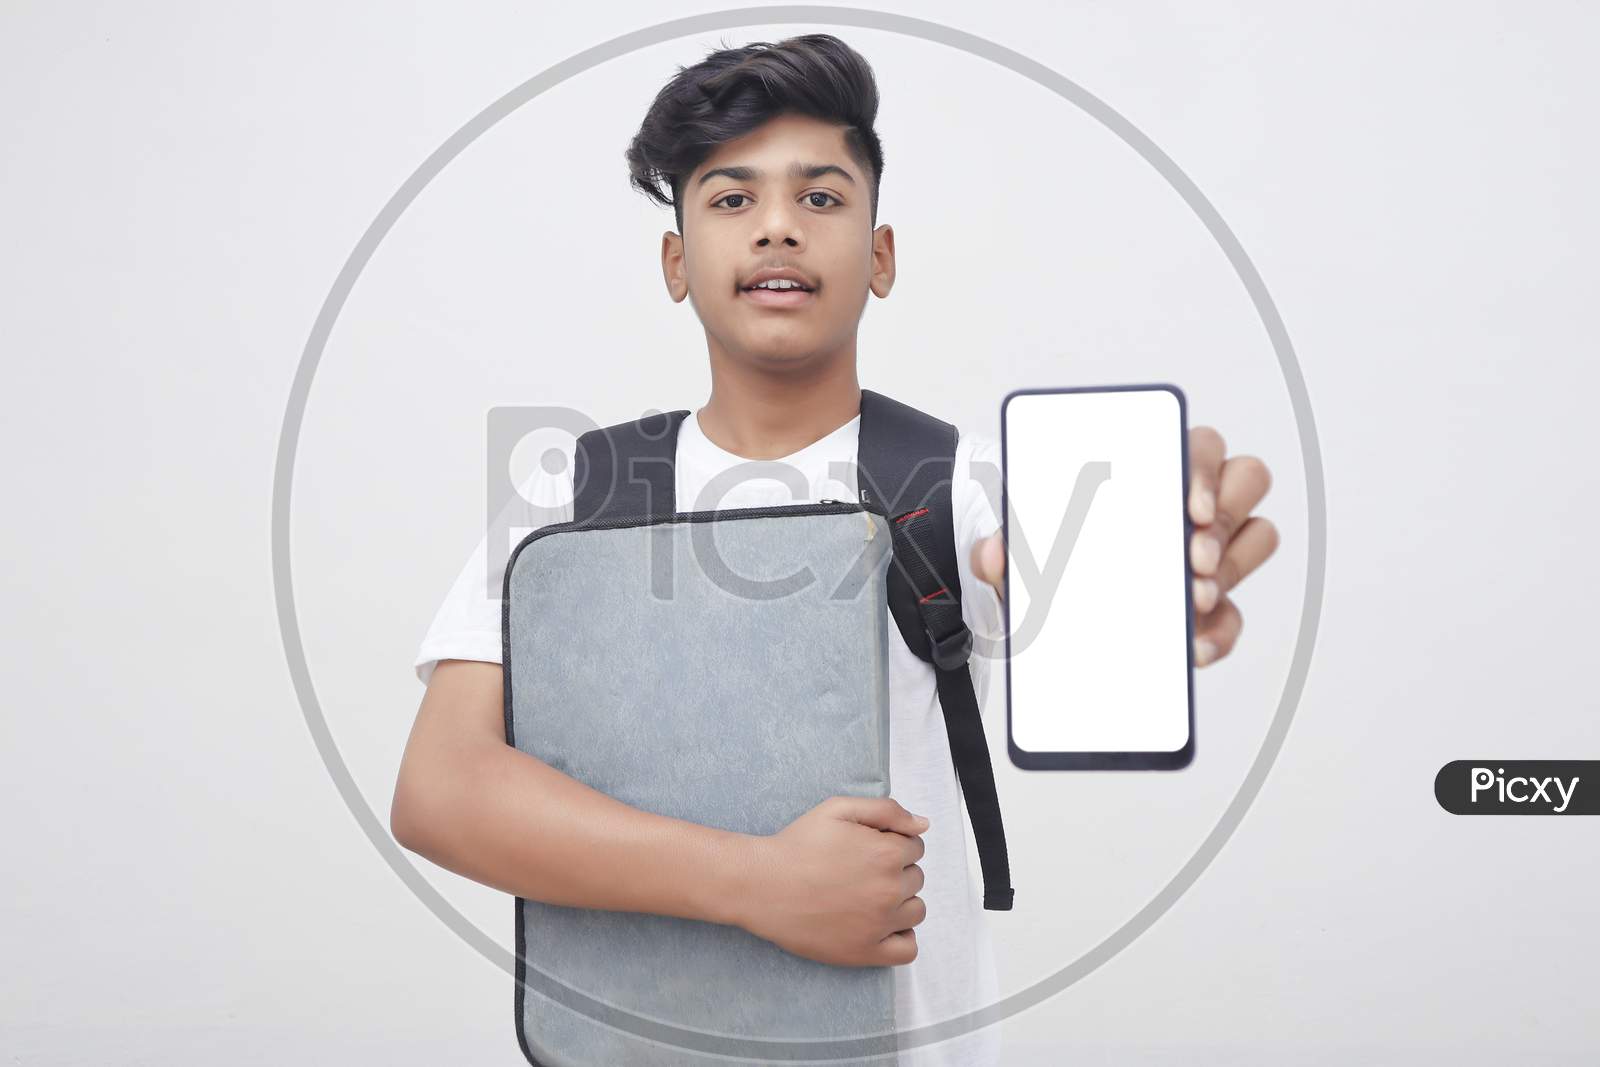 Young Indian Student Holding File And Showing Smartphone Screen On White Background.